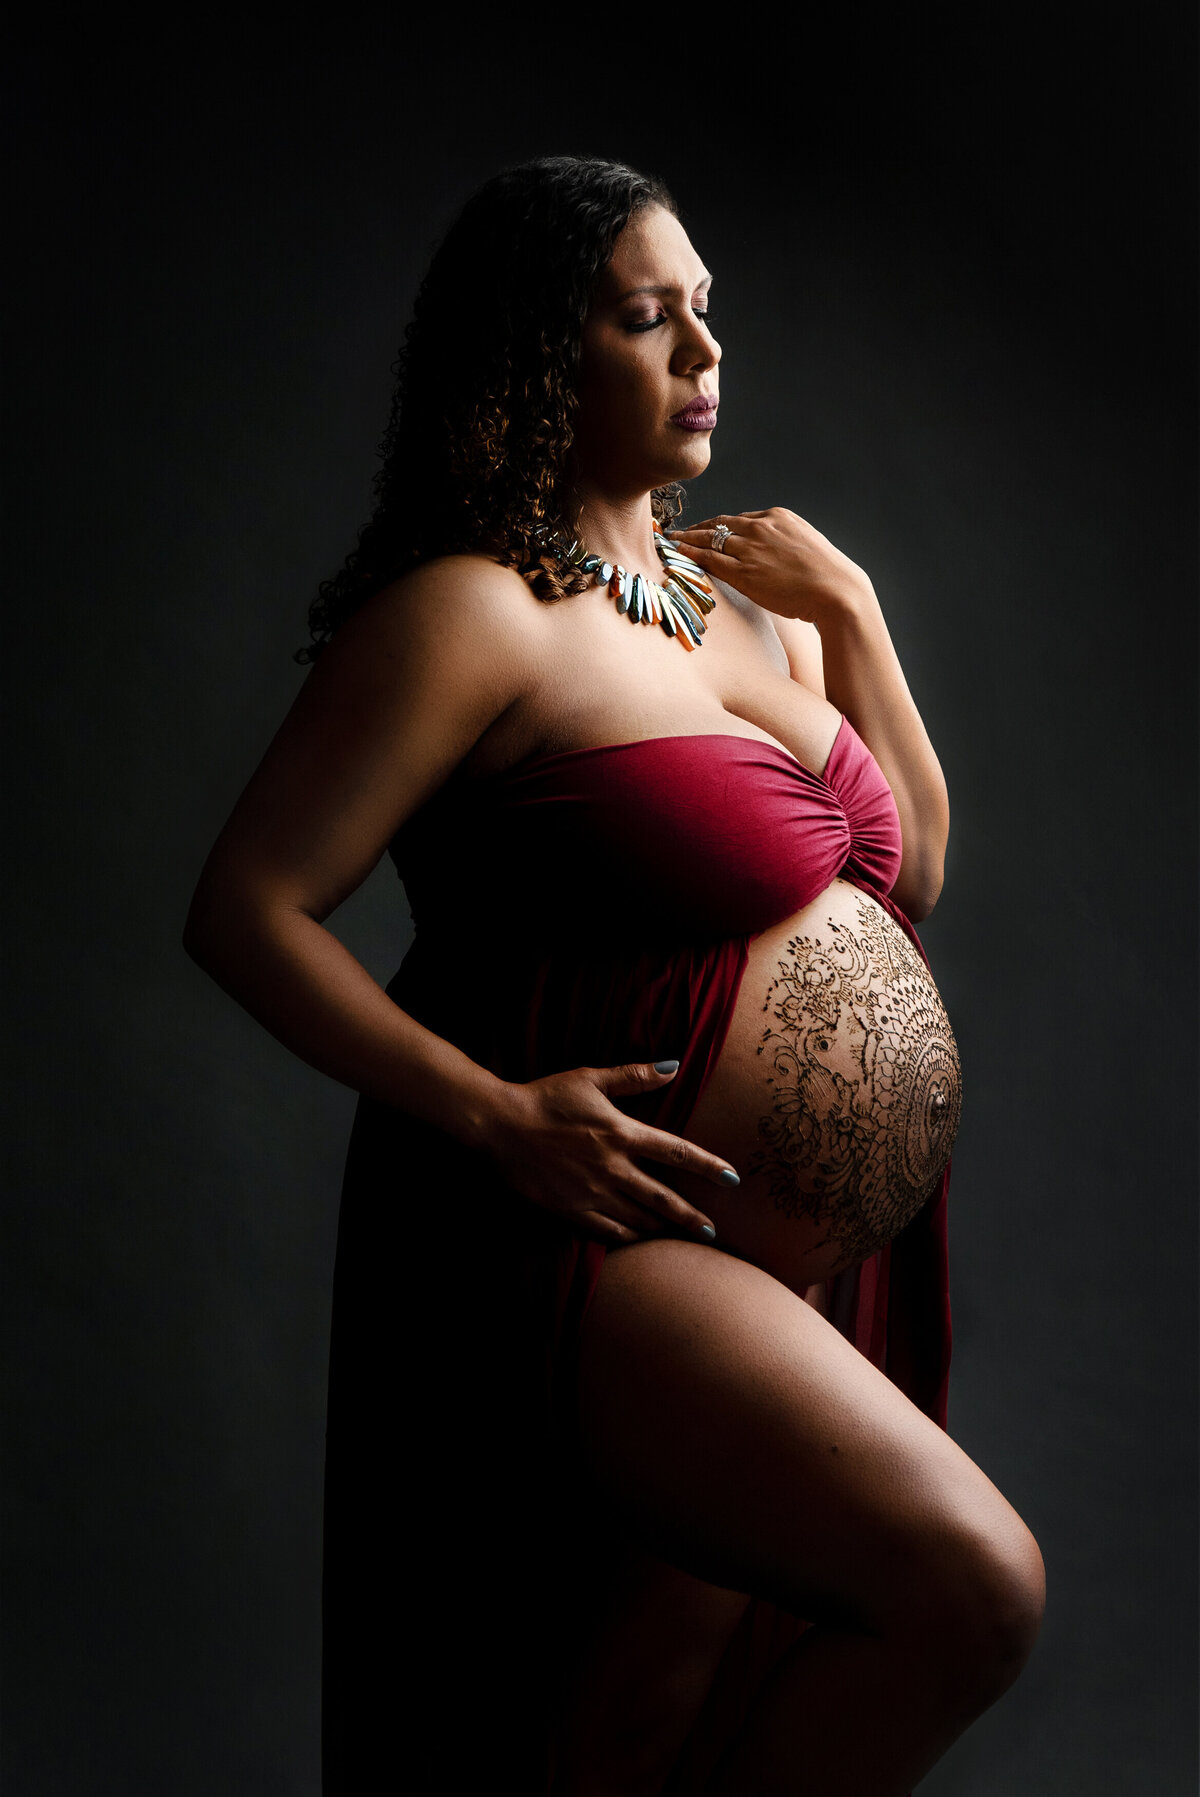 st-louis-maternity-photographer-expecting-mother-in-red-gown-showing-belly-with-henna-against-dark-background